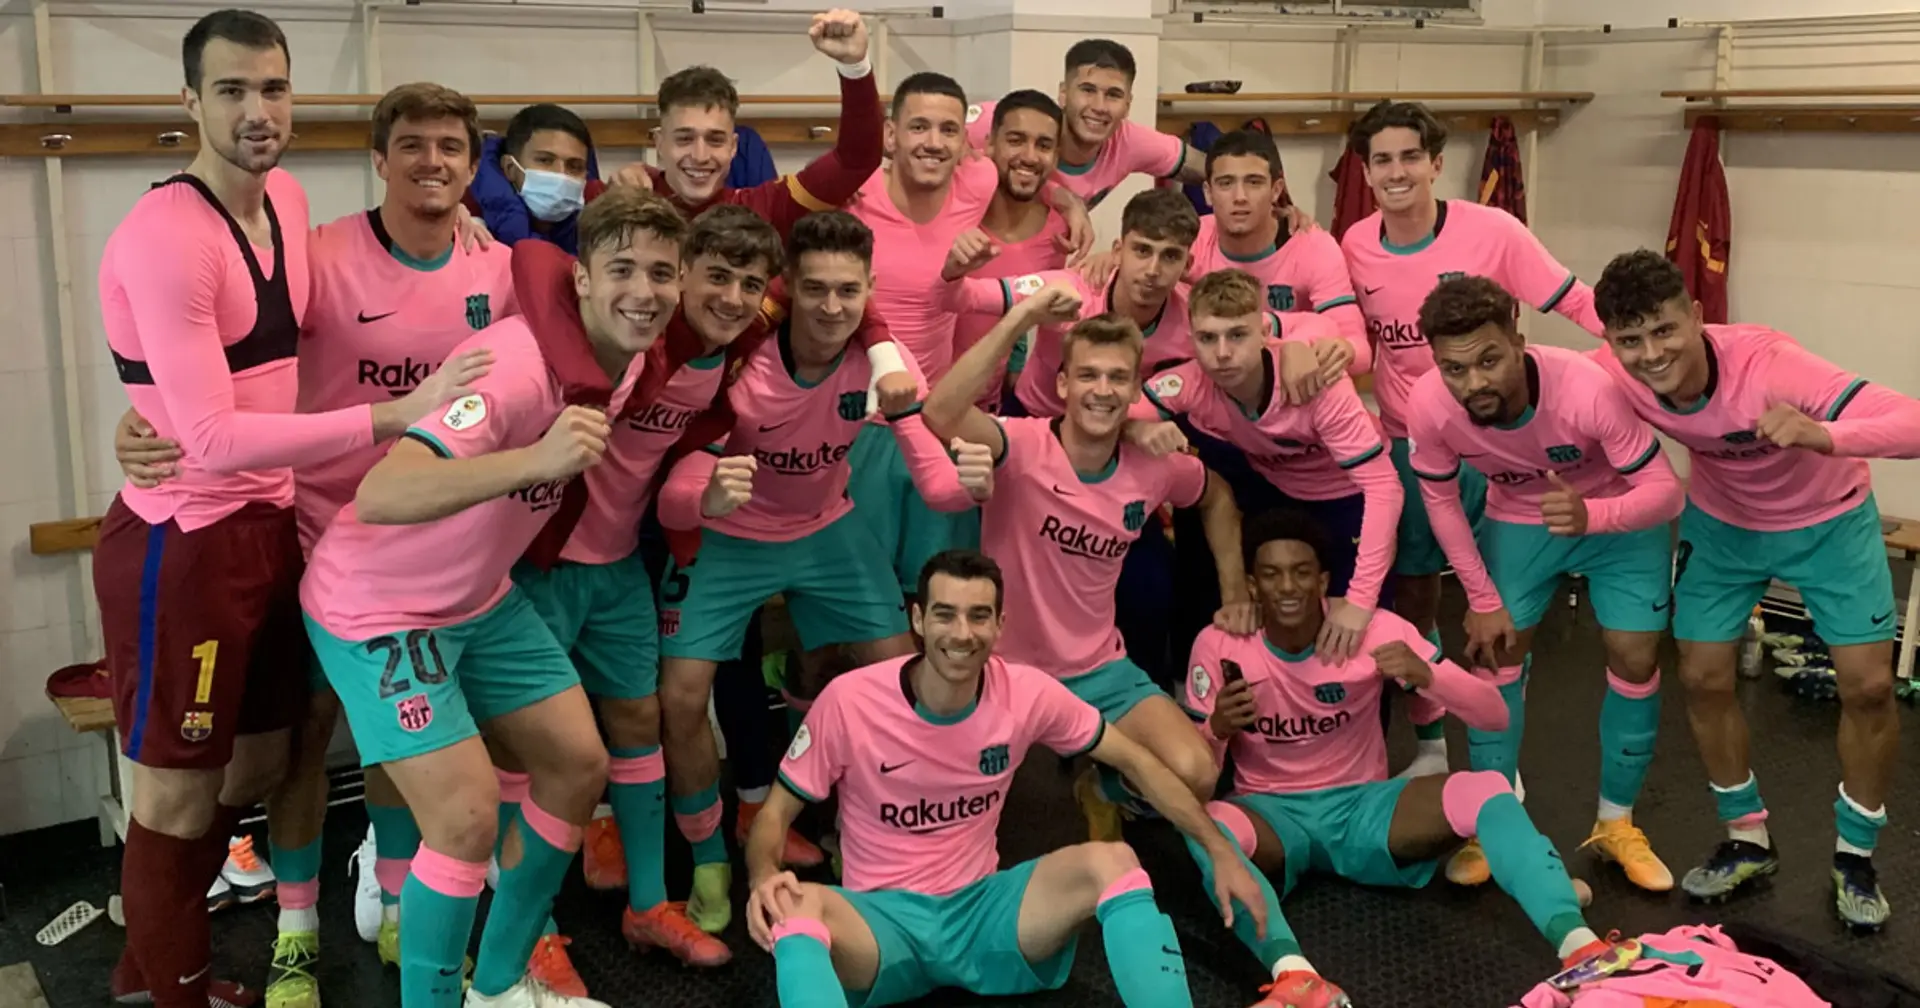 Barca B register another win to cement place inside top 3 (video)